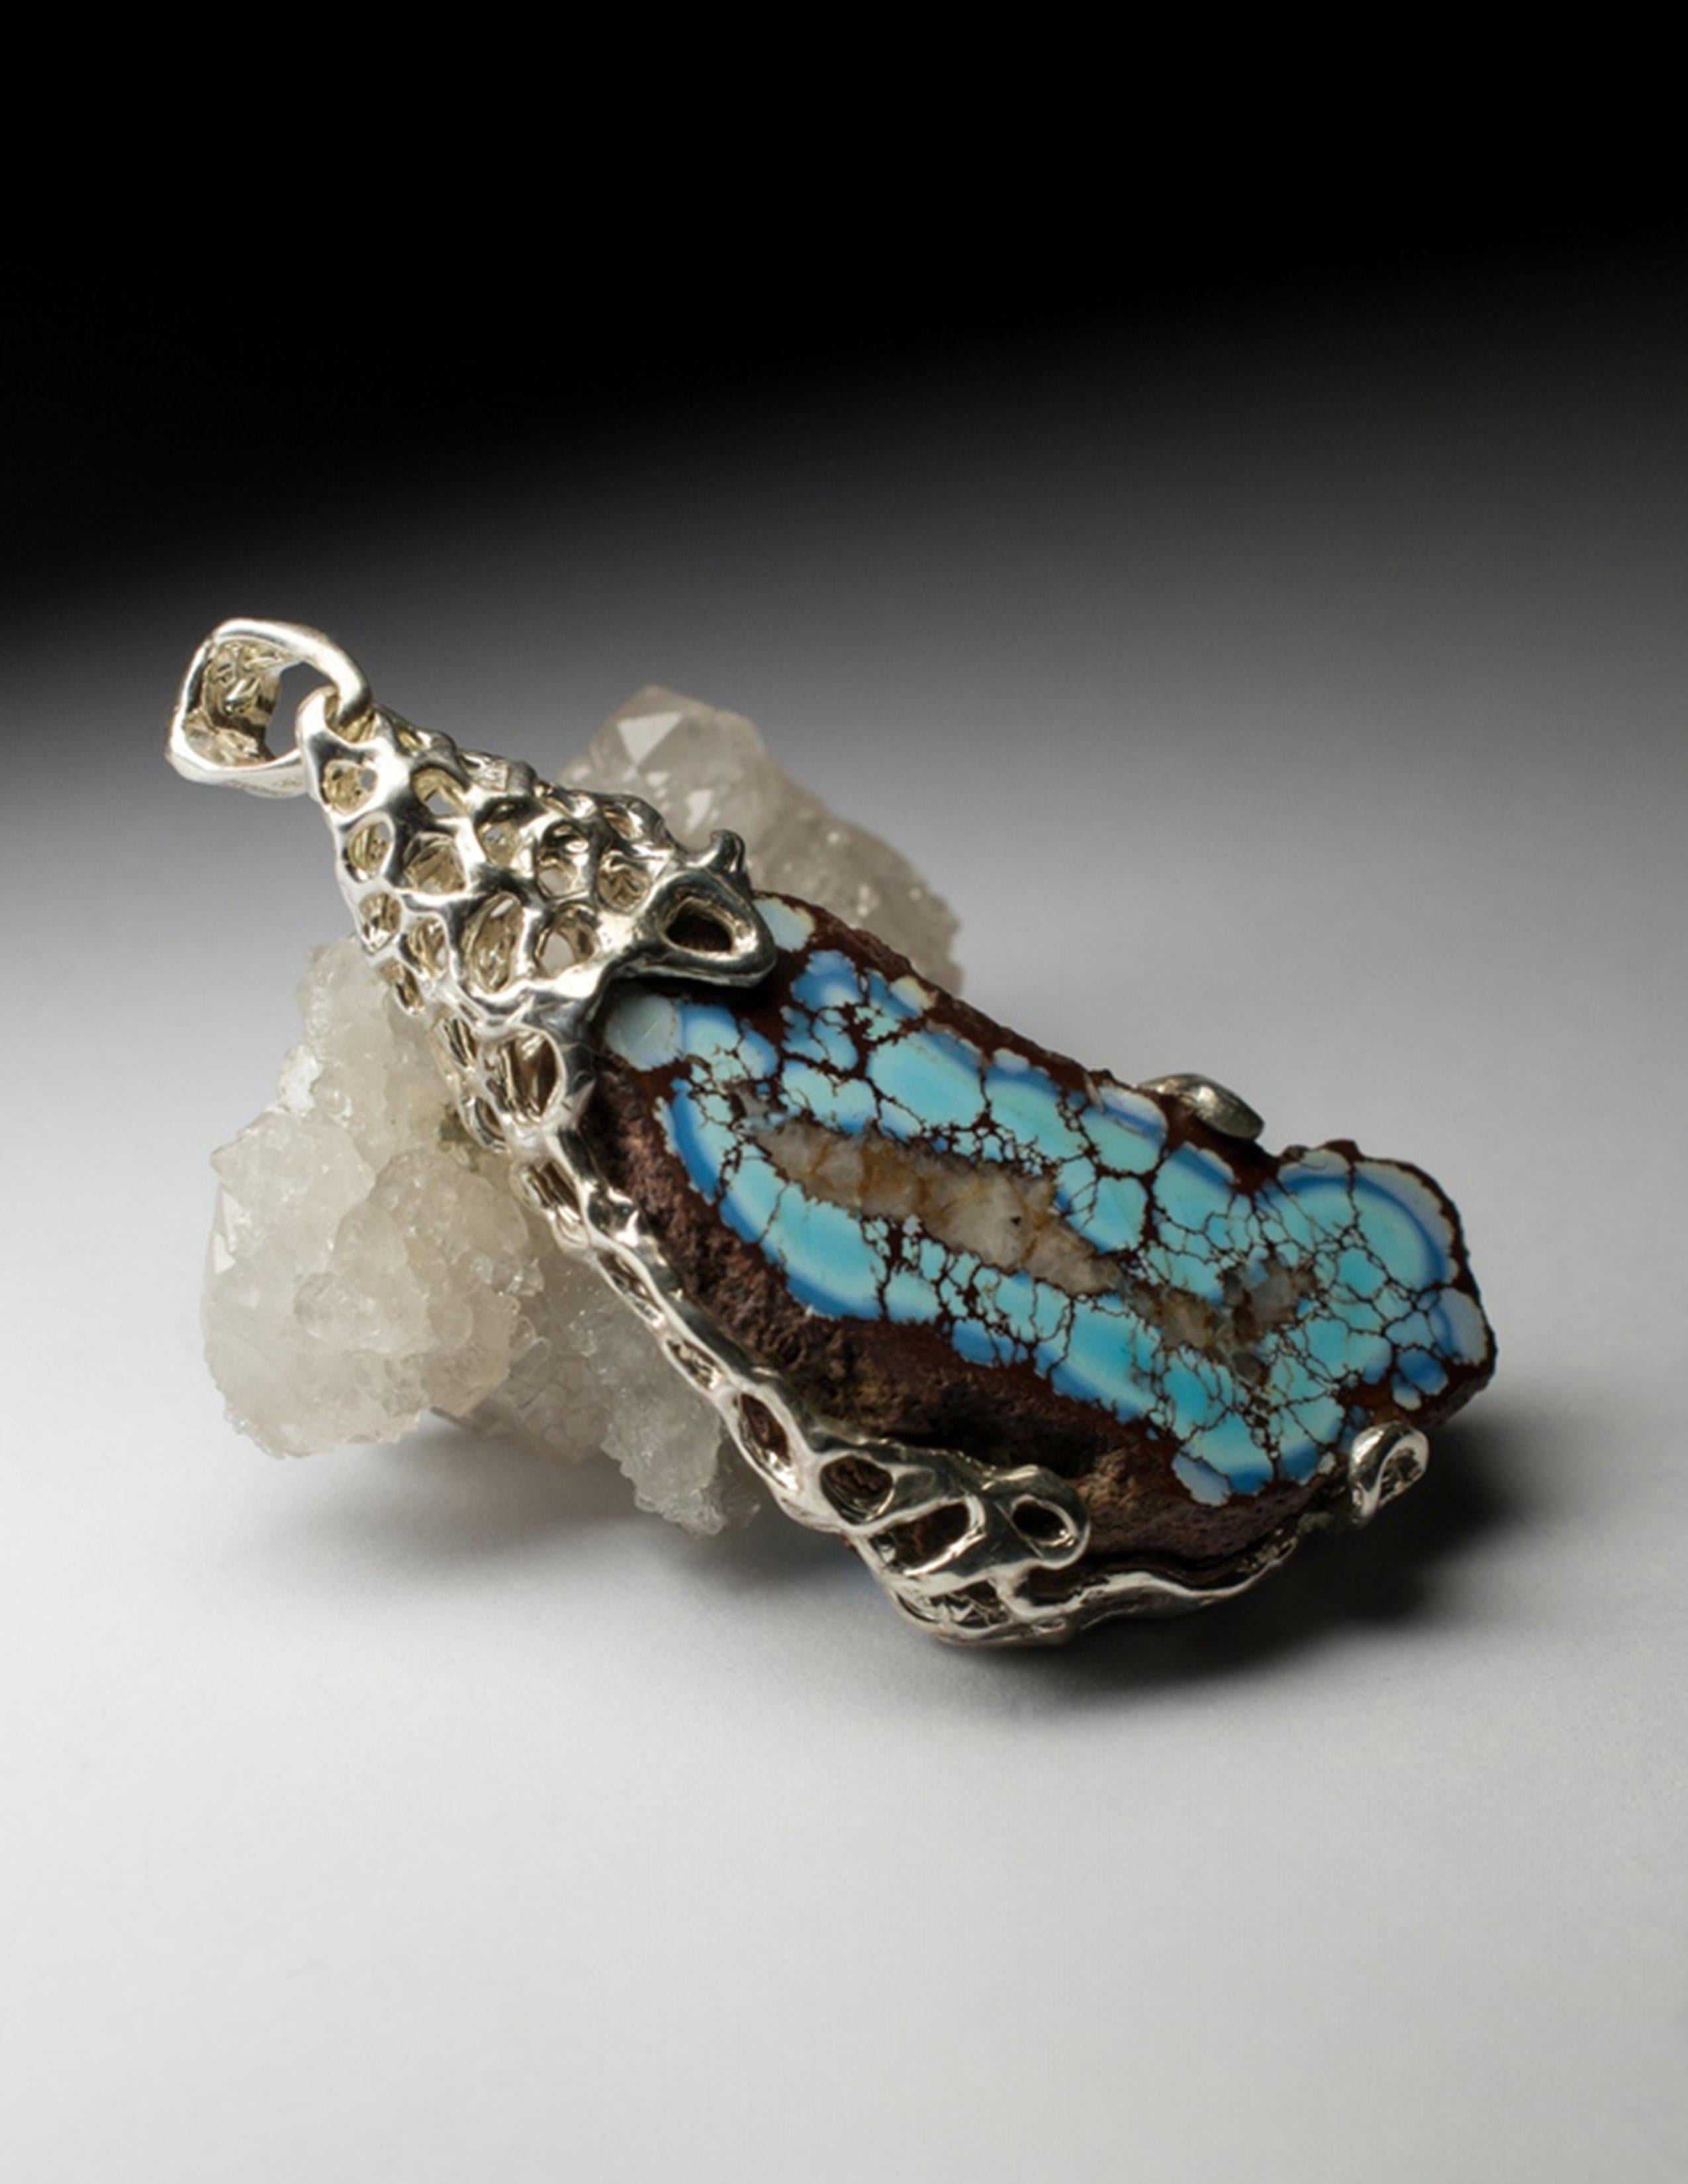 Silver pendant with natural Turquoise
turquoise origin - Kazakhstan
stone measurements - 0.51 х 0.87 х 1.54 in / 13 х 22 х 39 mm
stone weight - 64.5 carats
pendant weight - 21.01 grams
pendant height - 2.36 in / 60 mm


We ship our jewelry worldwide